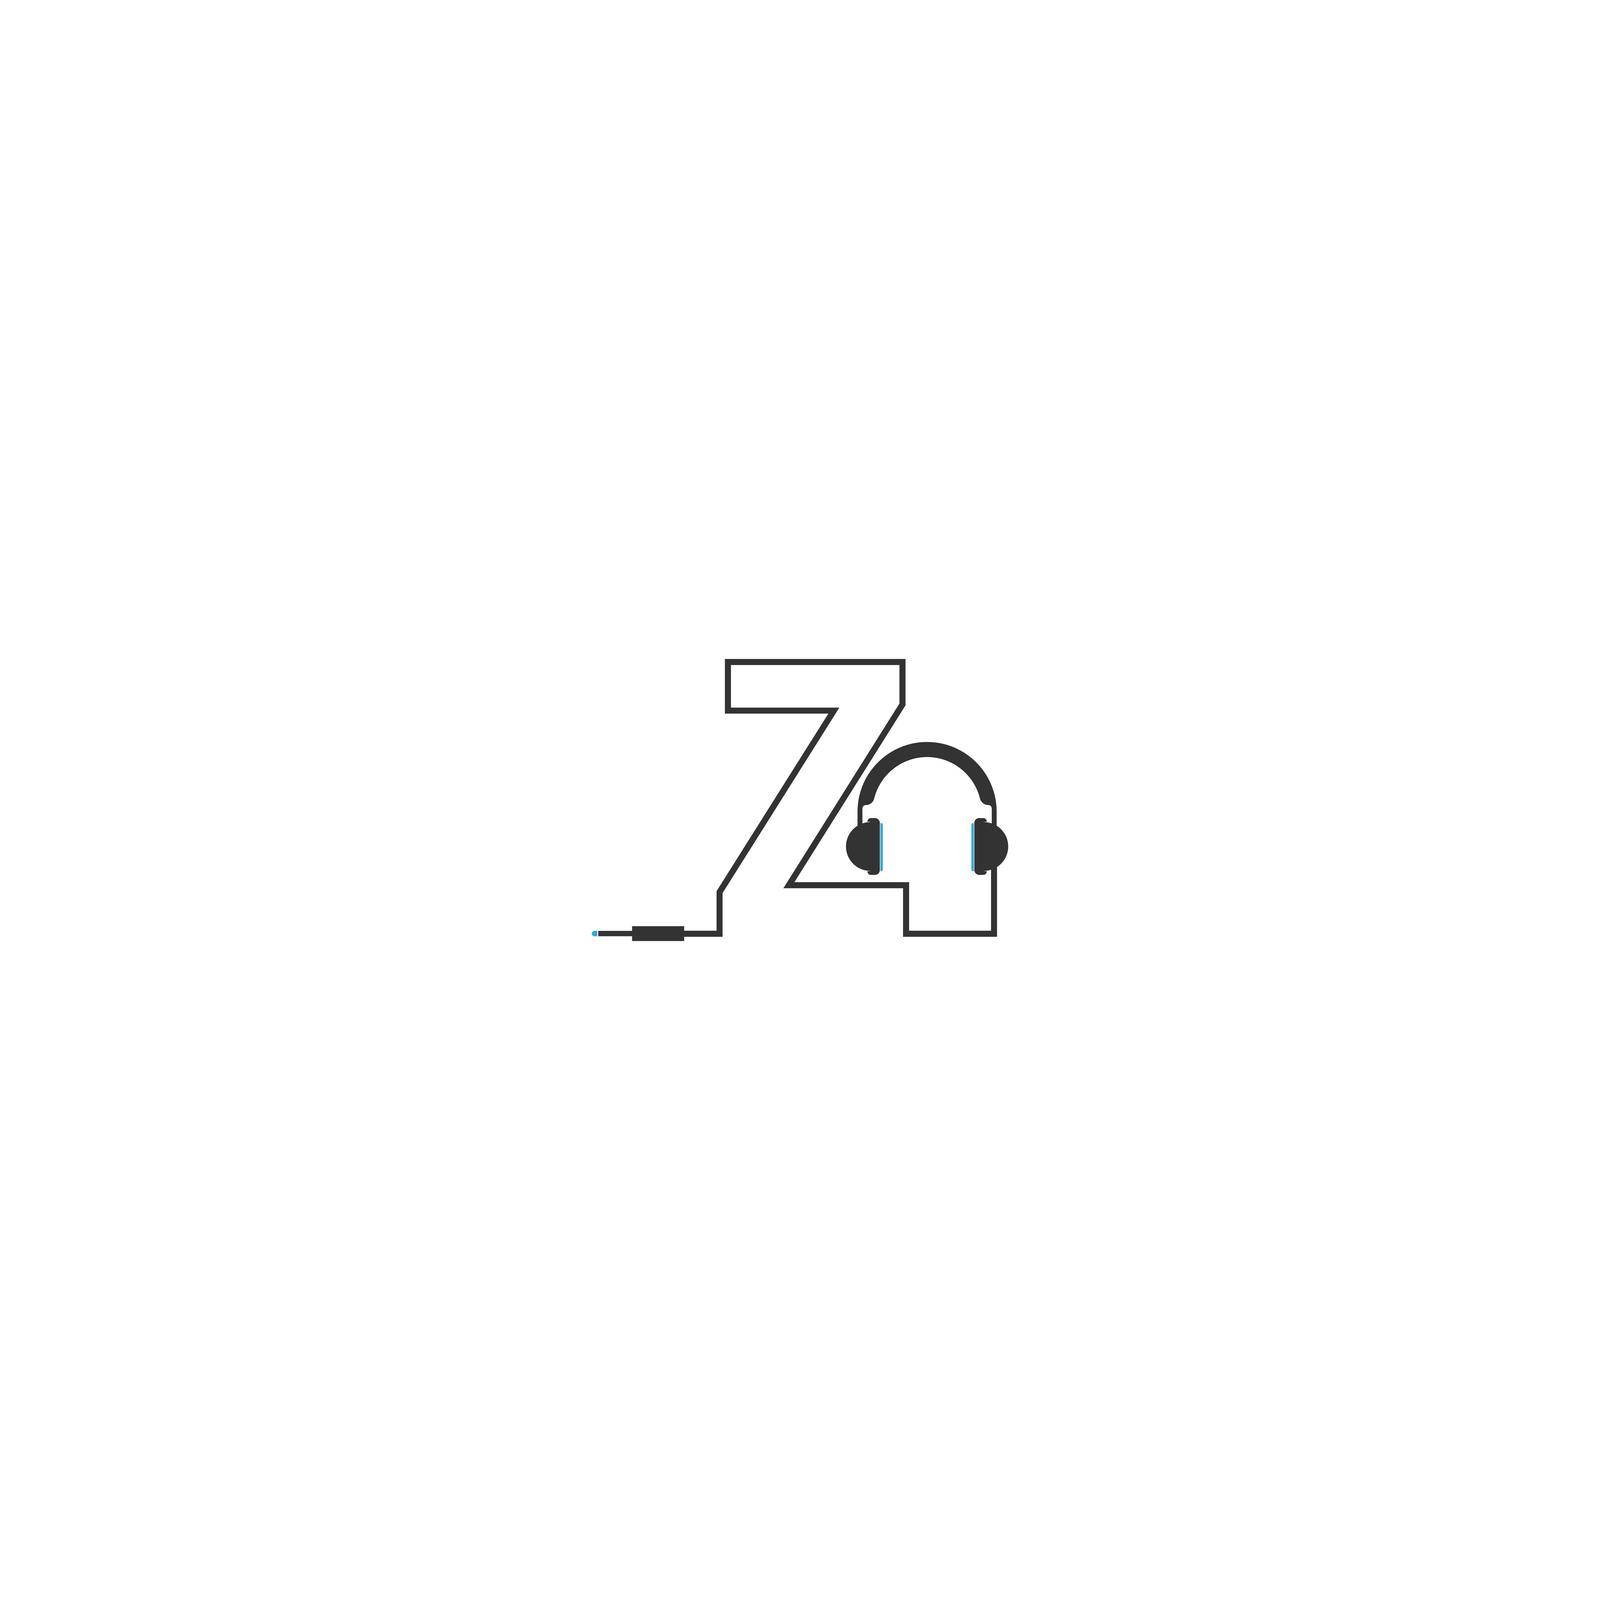 Letter Z and podcast logotype by bellaxbudhong3